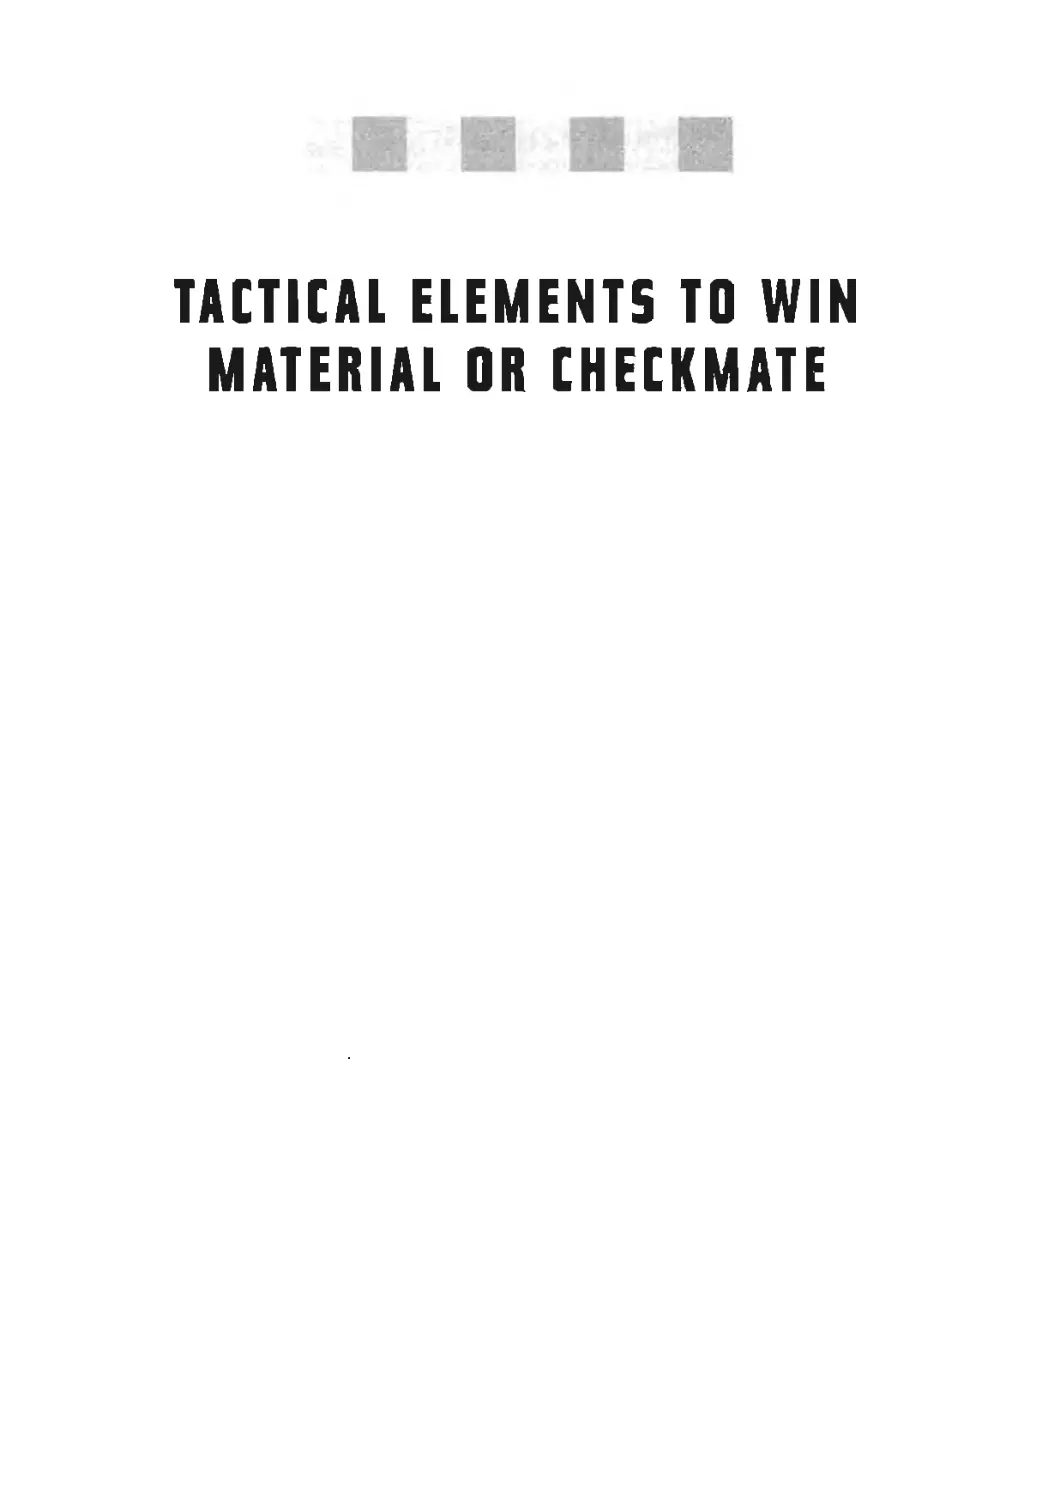 Tatical elements to win material or checkmate